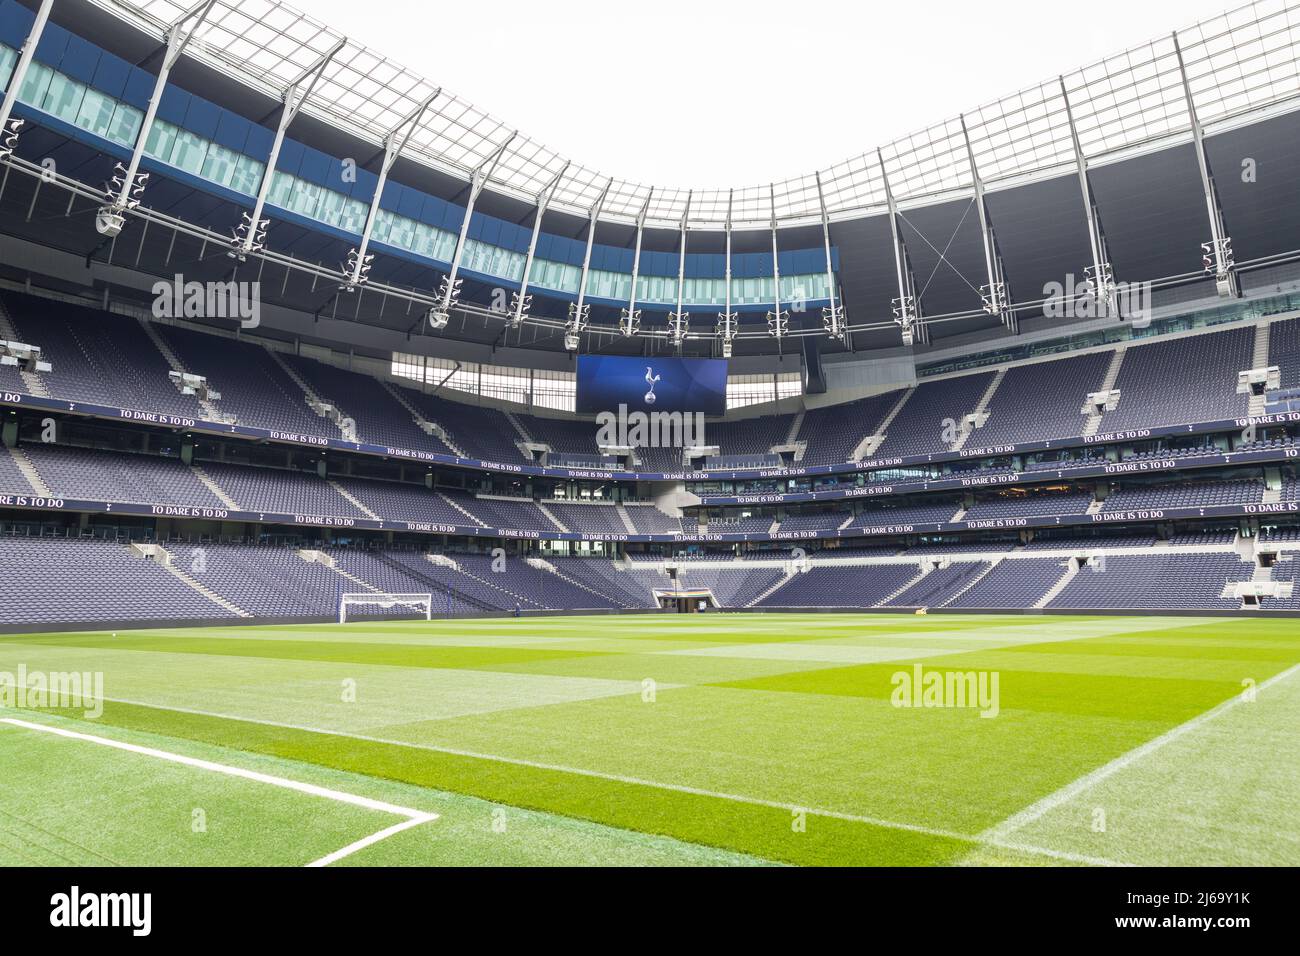 view of the empty pitch and stand of the Tottenham Hotspur football stadium Stock Photo